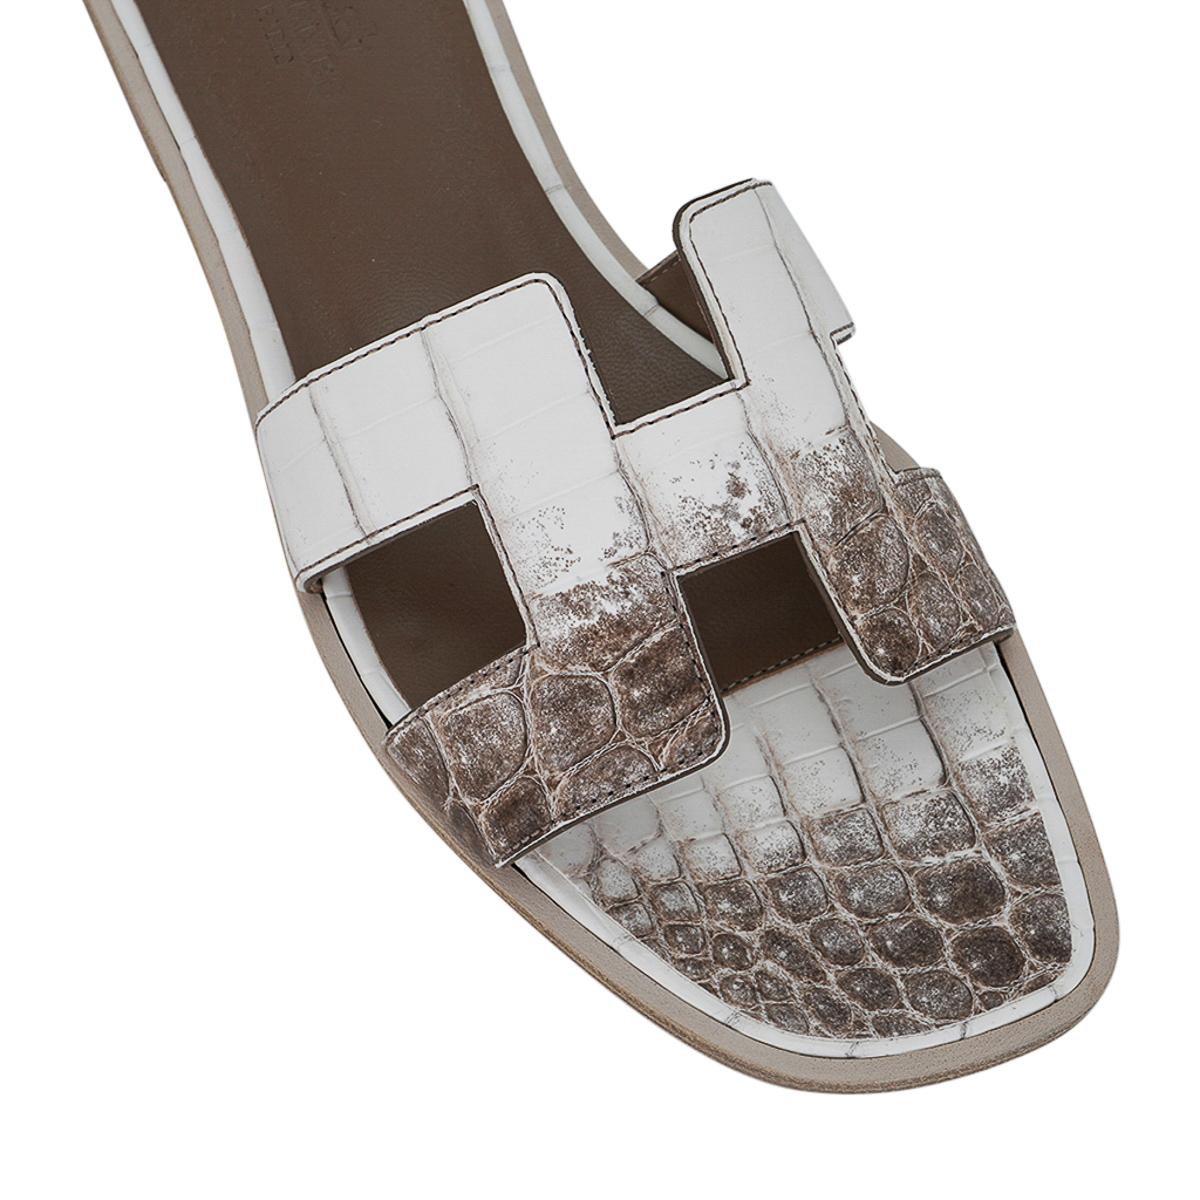 Mightychic offers Hermes  Himalaya matte alligator Oran sandals.
These stunning limited edition Hermes Oran flat slide sandals are a rare find.
The iconic H cutout over the top of the foot.
Wood heel with leather sole.
Comes with sleepers, signature